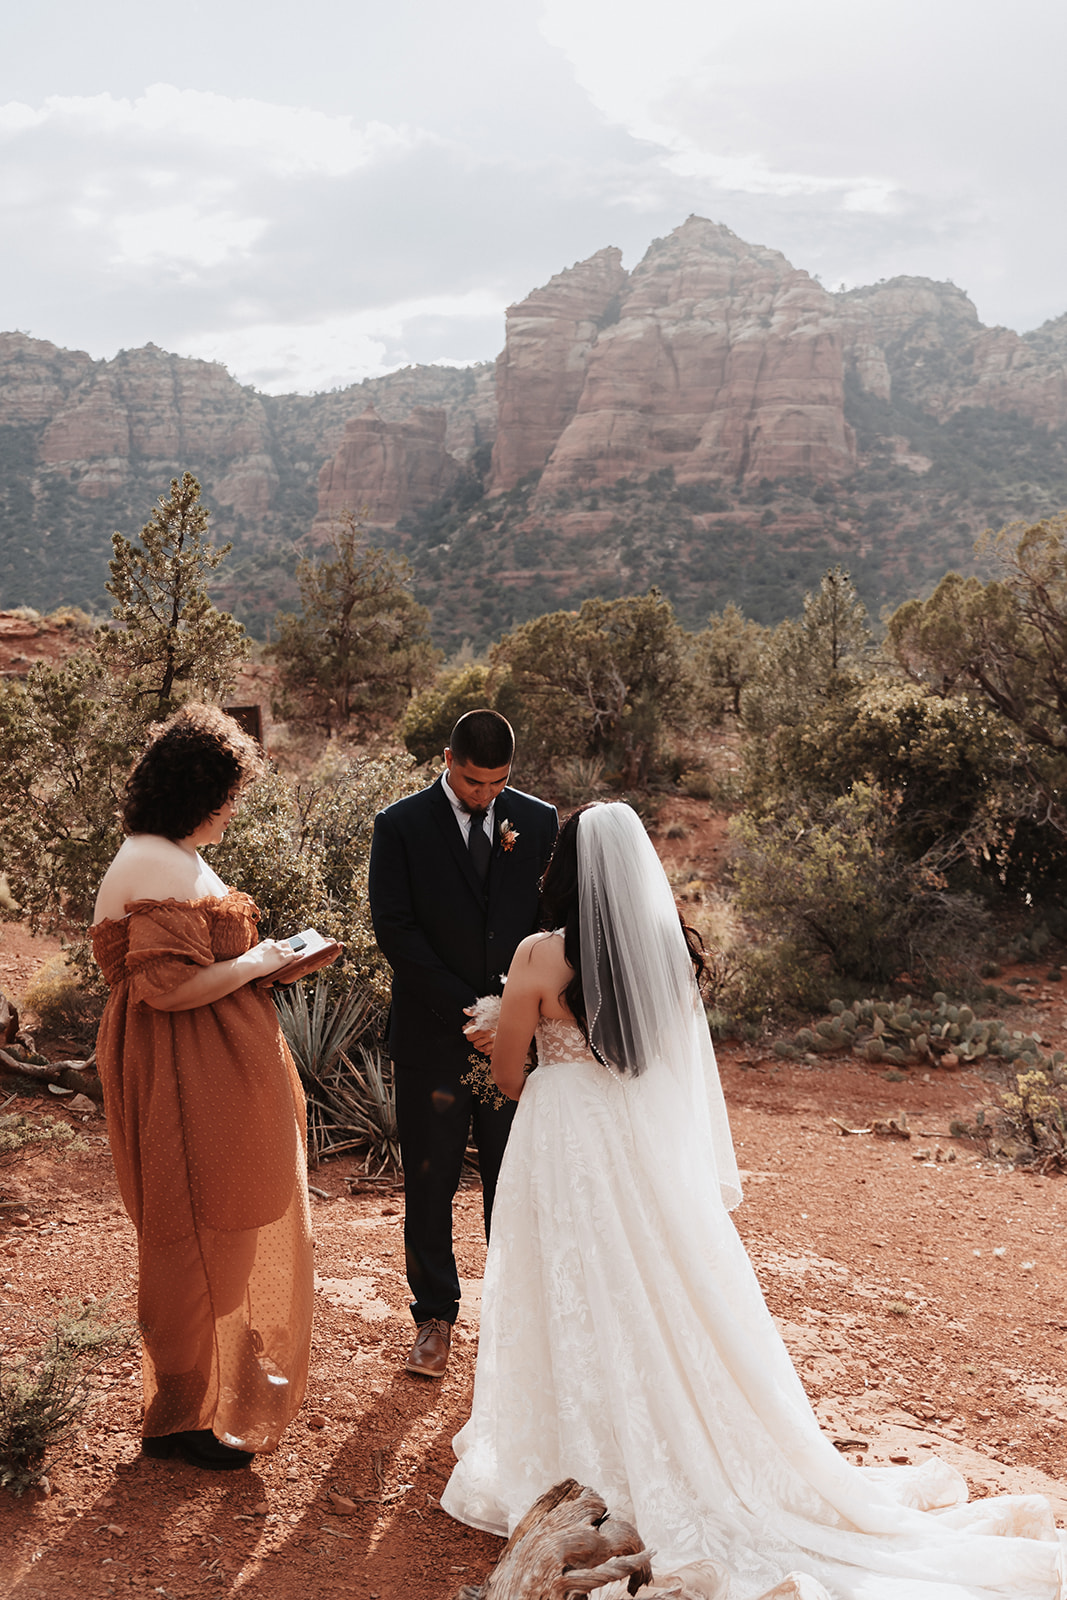 A couple at their sedona elopement ceremony